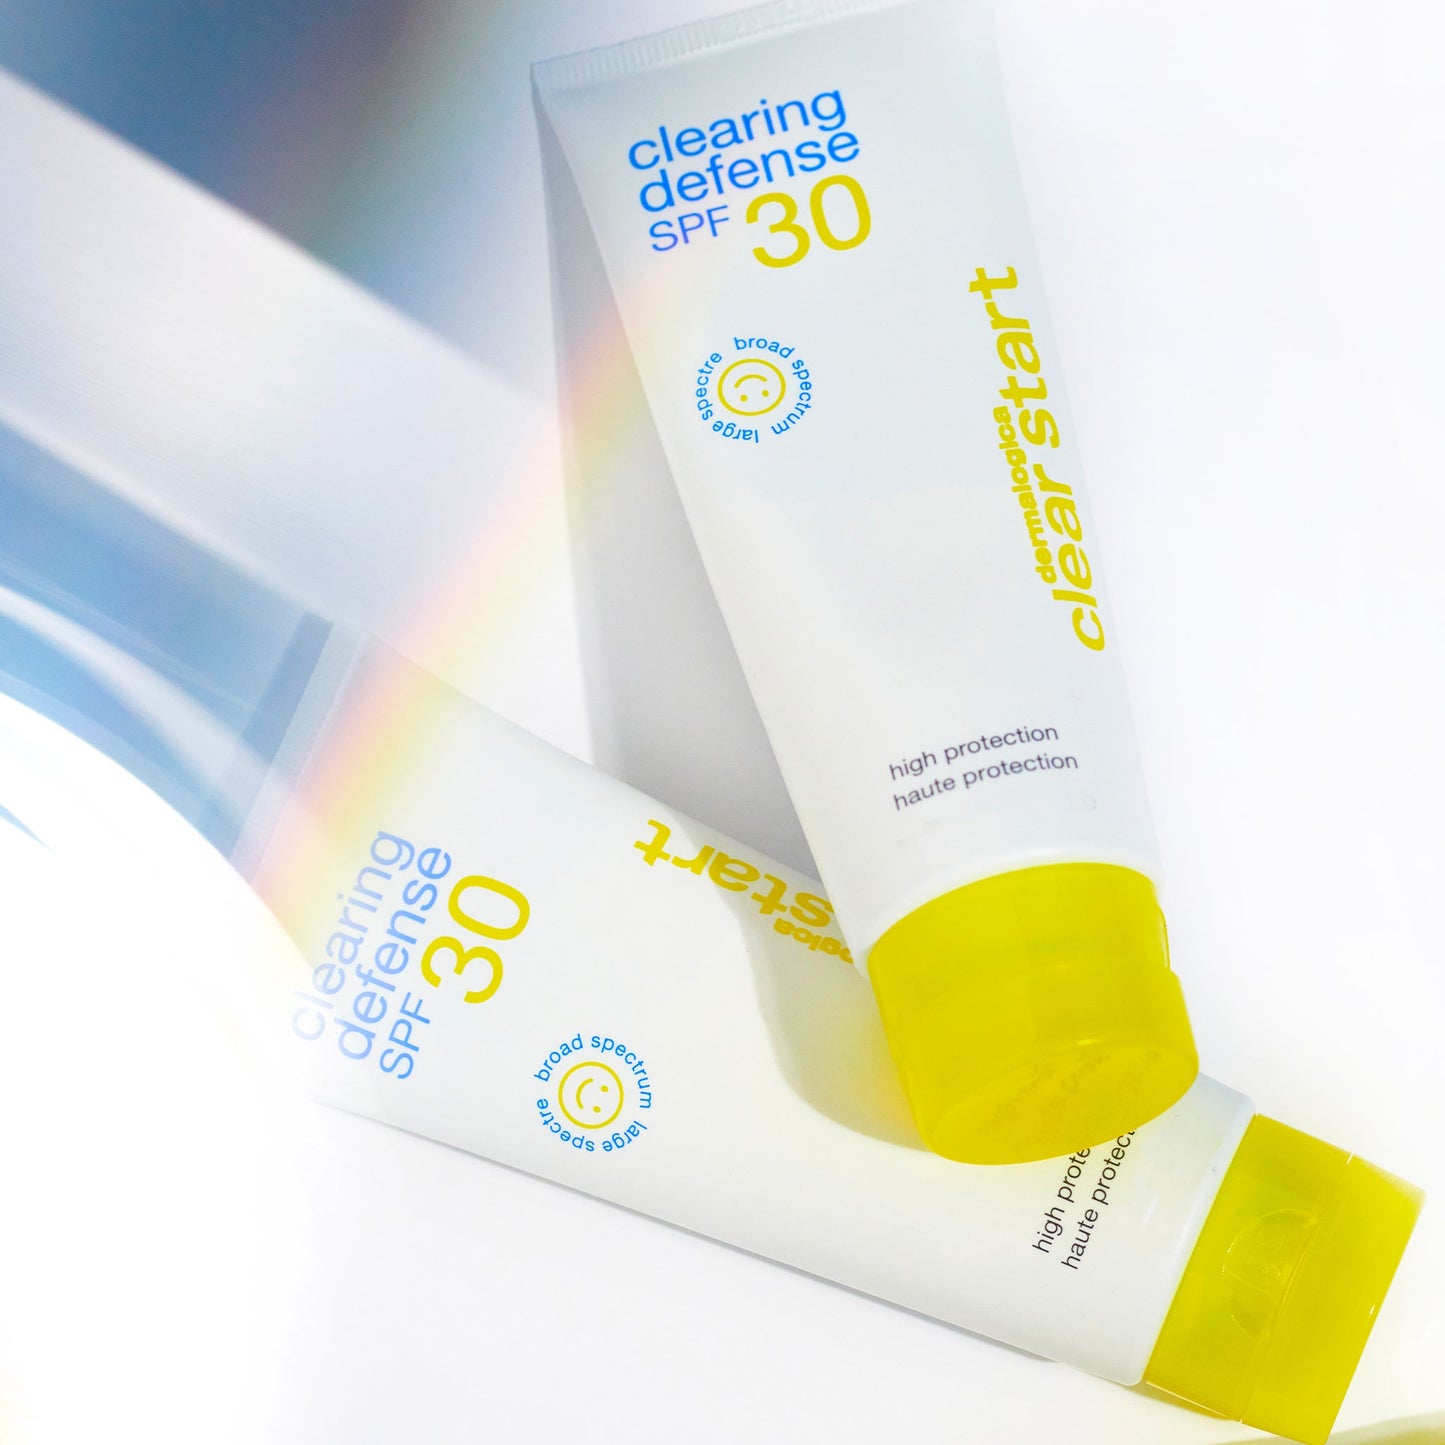 Two Clearing Defense SPF 30 bottles